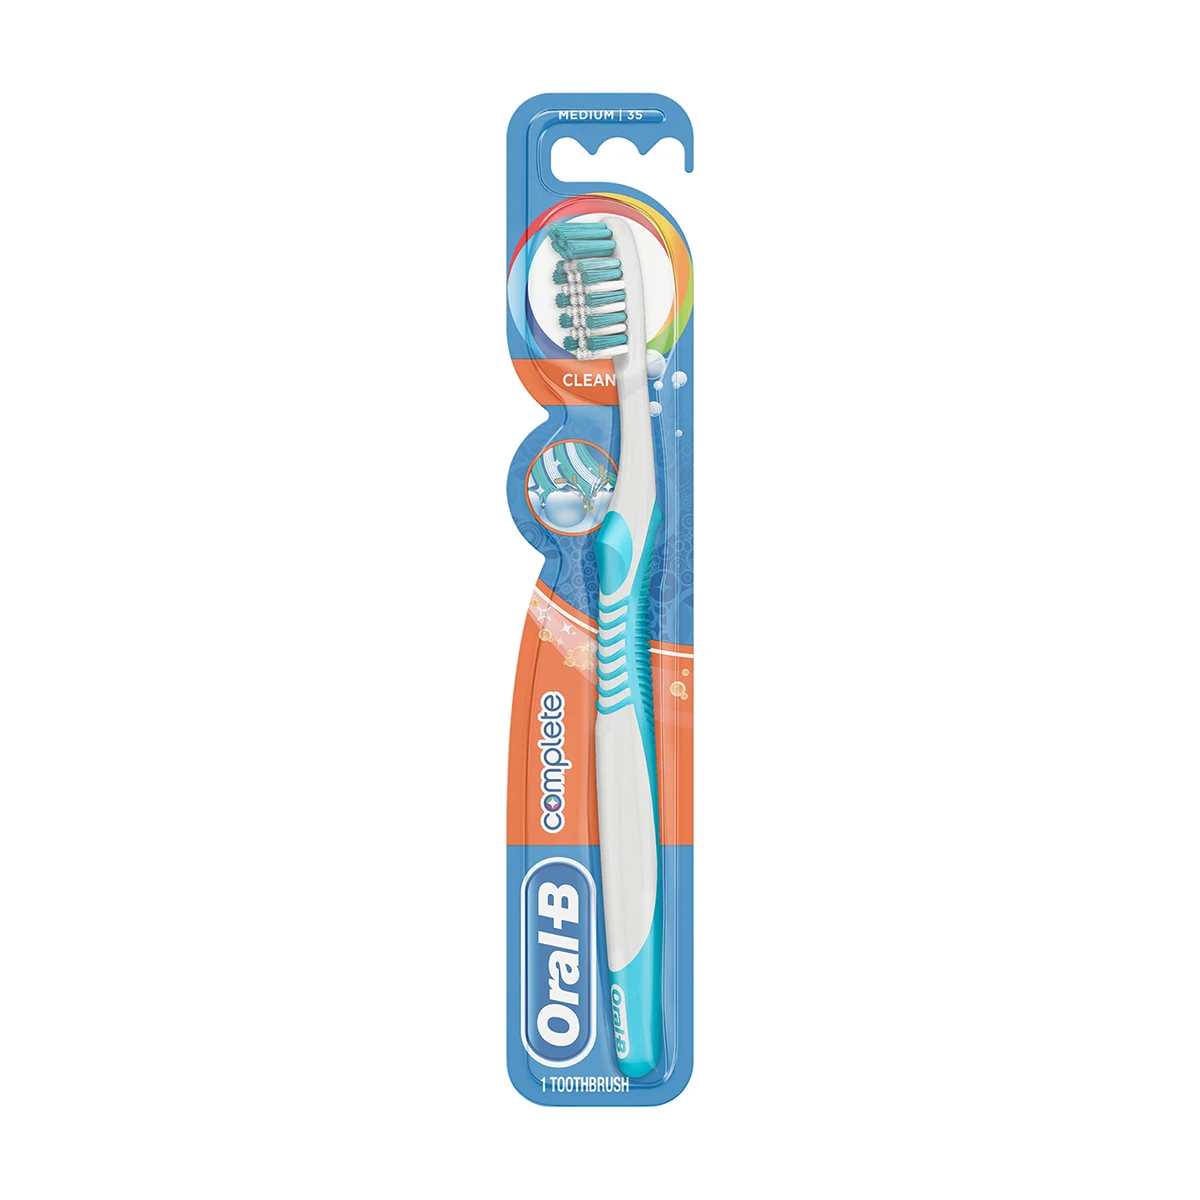 Oral B Complete - Oral-B Complete Clean Toothbrush 